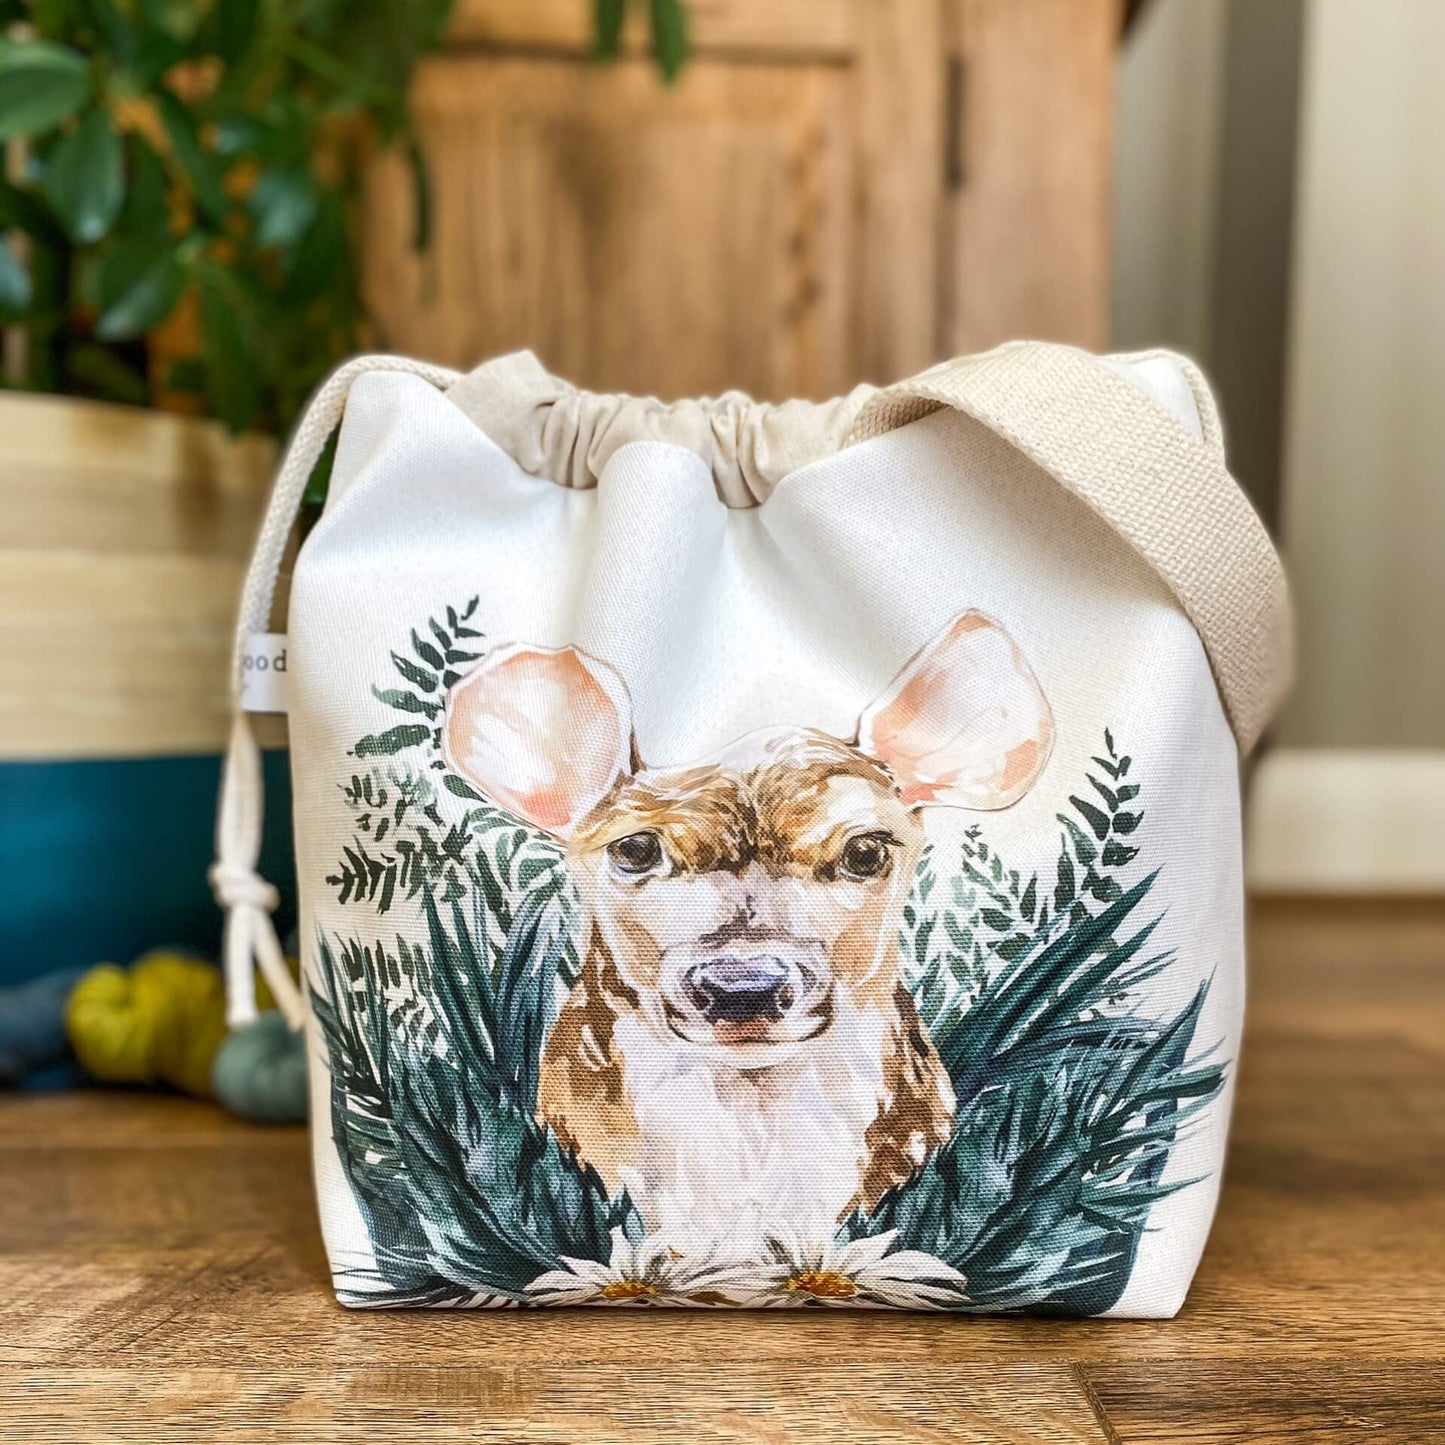 A close up of a project bag with a drawstring top. We are looking right into the eyes of a cute little baby deer that is hiding amongst woodland greenery. Behind the bag are some skeins of yarn on the floor and a large houseplant. 